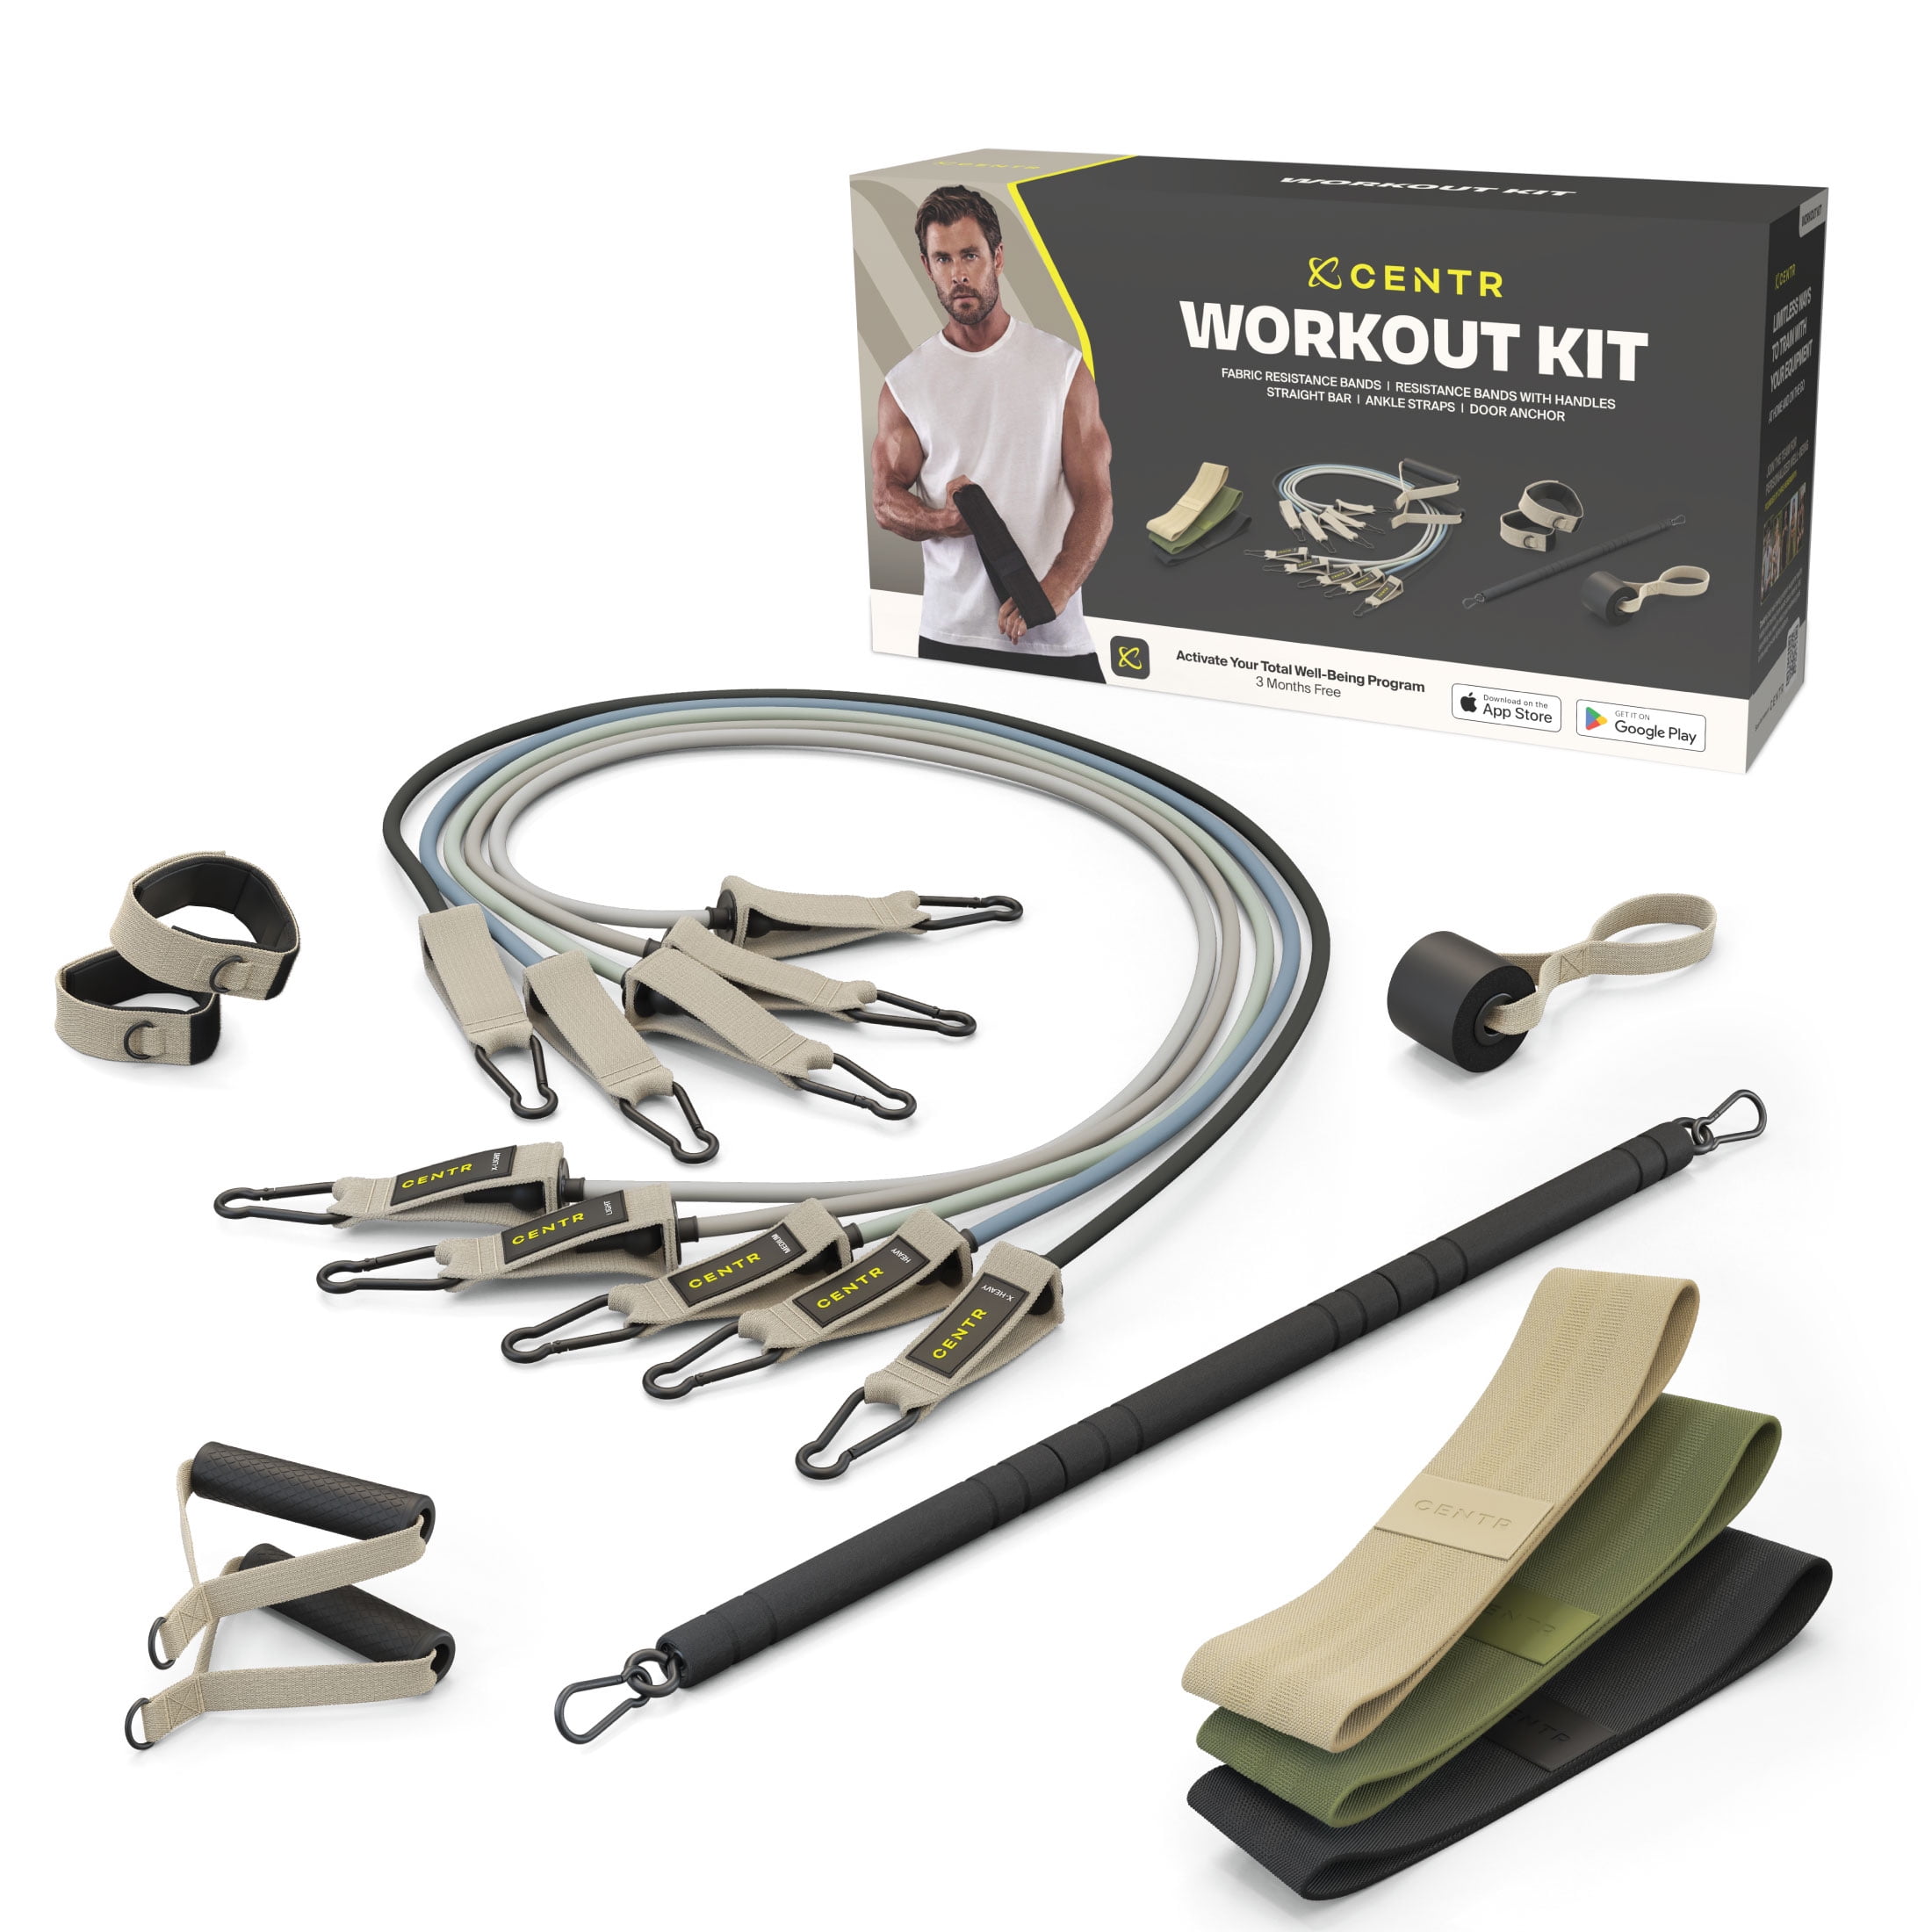 Centr by Chris Hemsworth Fitness Essentials Kit Home Workout Equipment +  3-Month Centr Subscription 